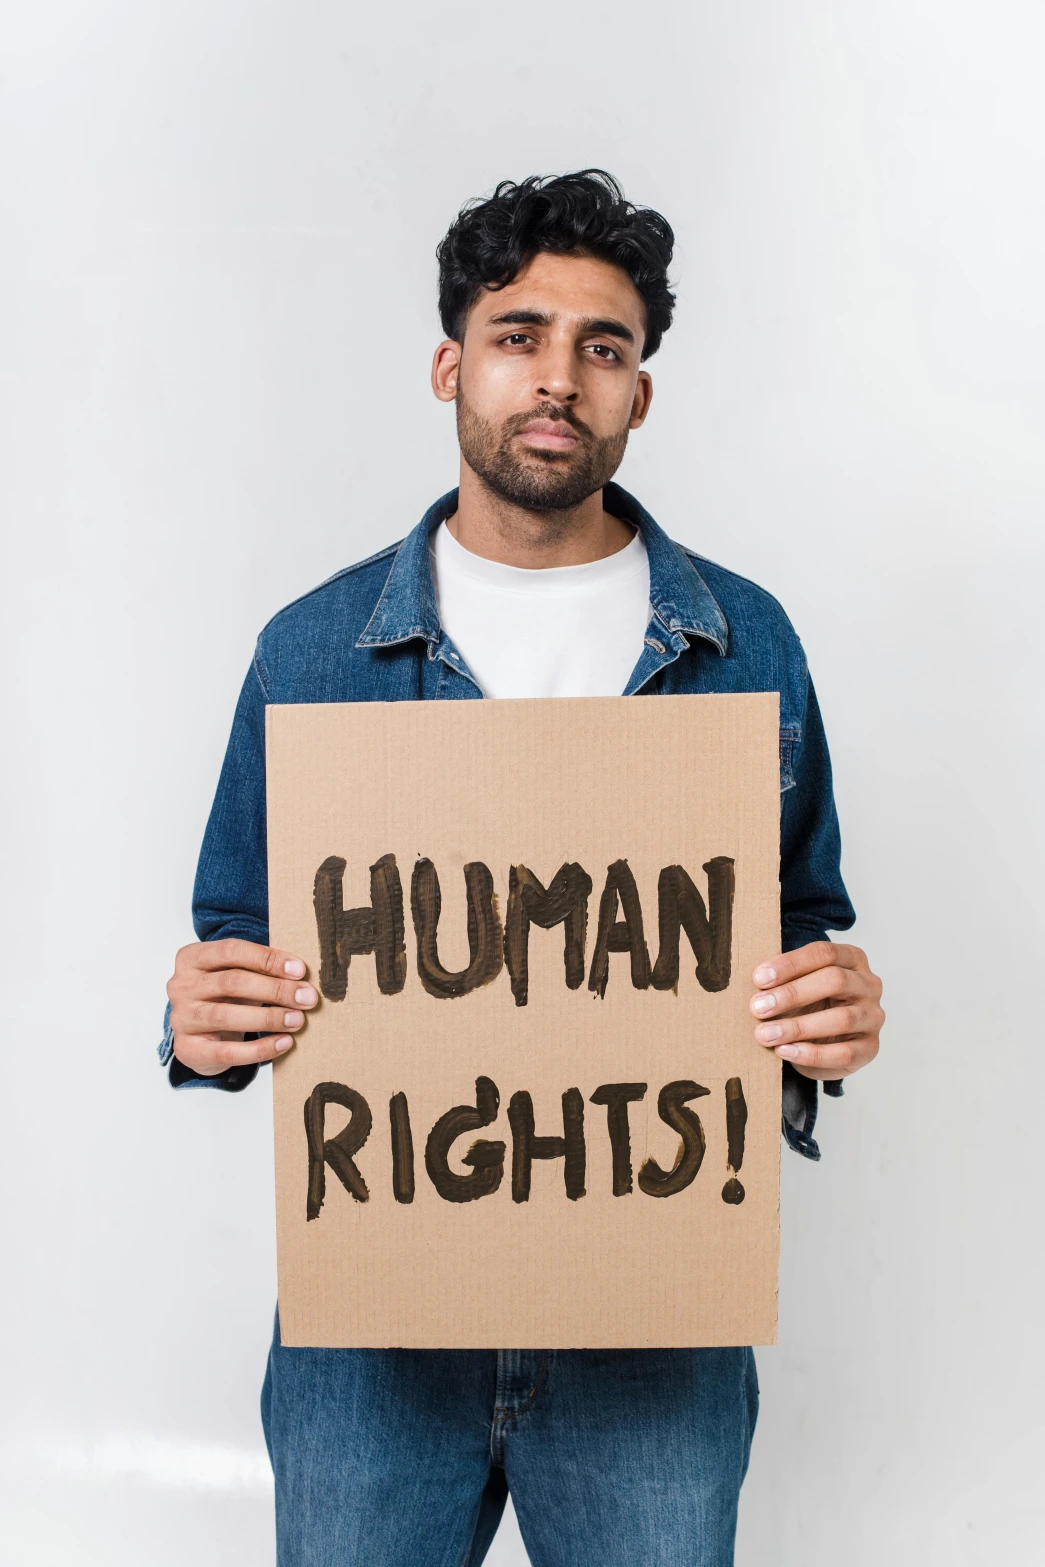 a man holding a sign that says human rights, an album cover, shutterstock, renaissance, indian, young adult male, alex flores, why